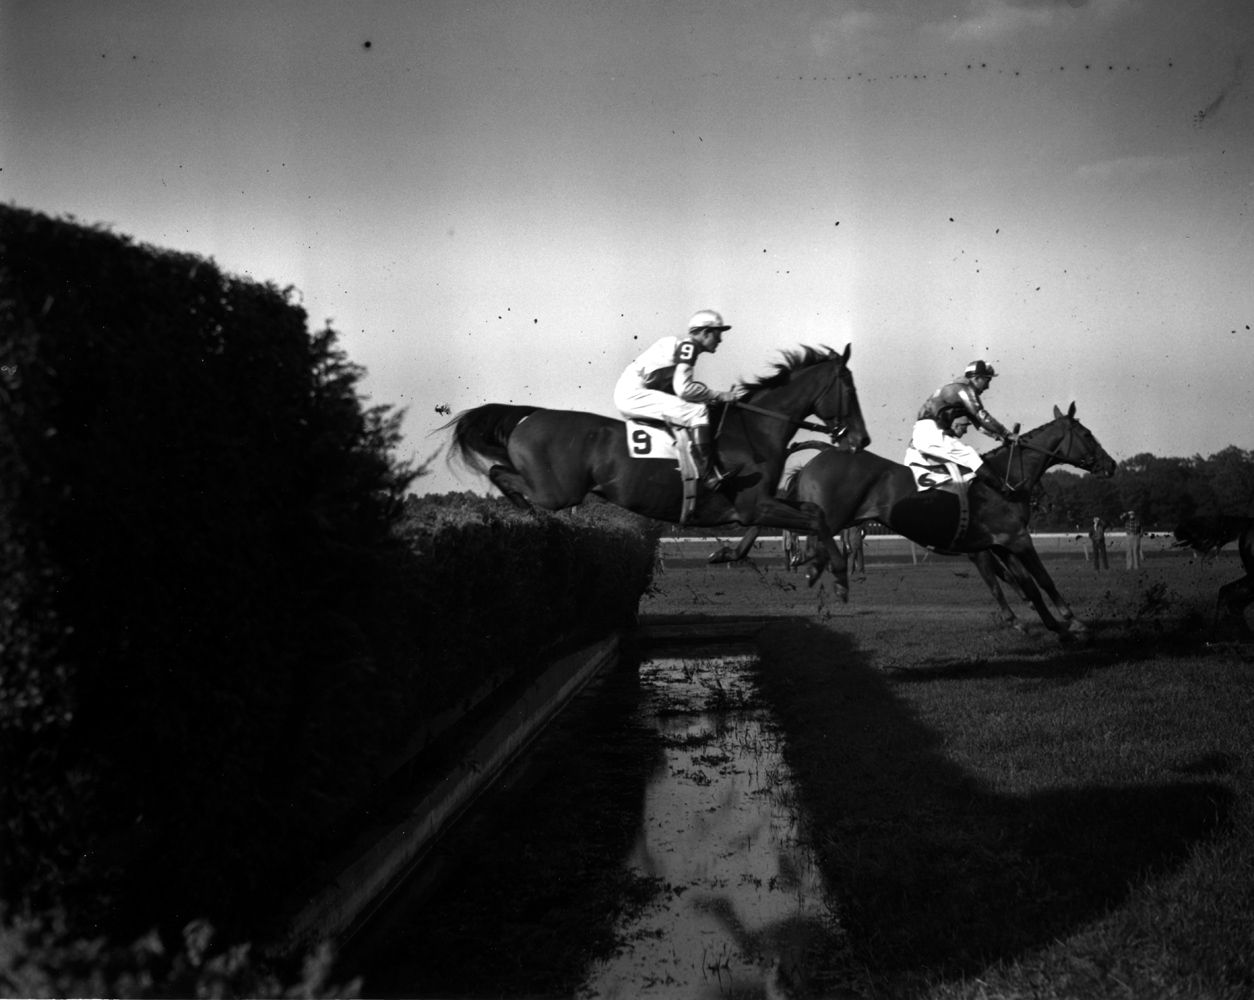 Elkridge (P. Smithwick up) taking a jump in the 1951 Grand National at Belmont Park, his final race (Keeneland Library Morgan Collection/Museum Collection)